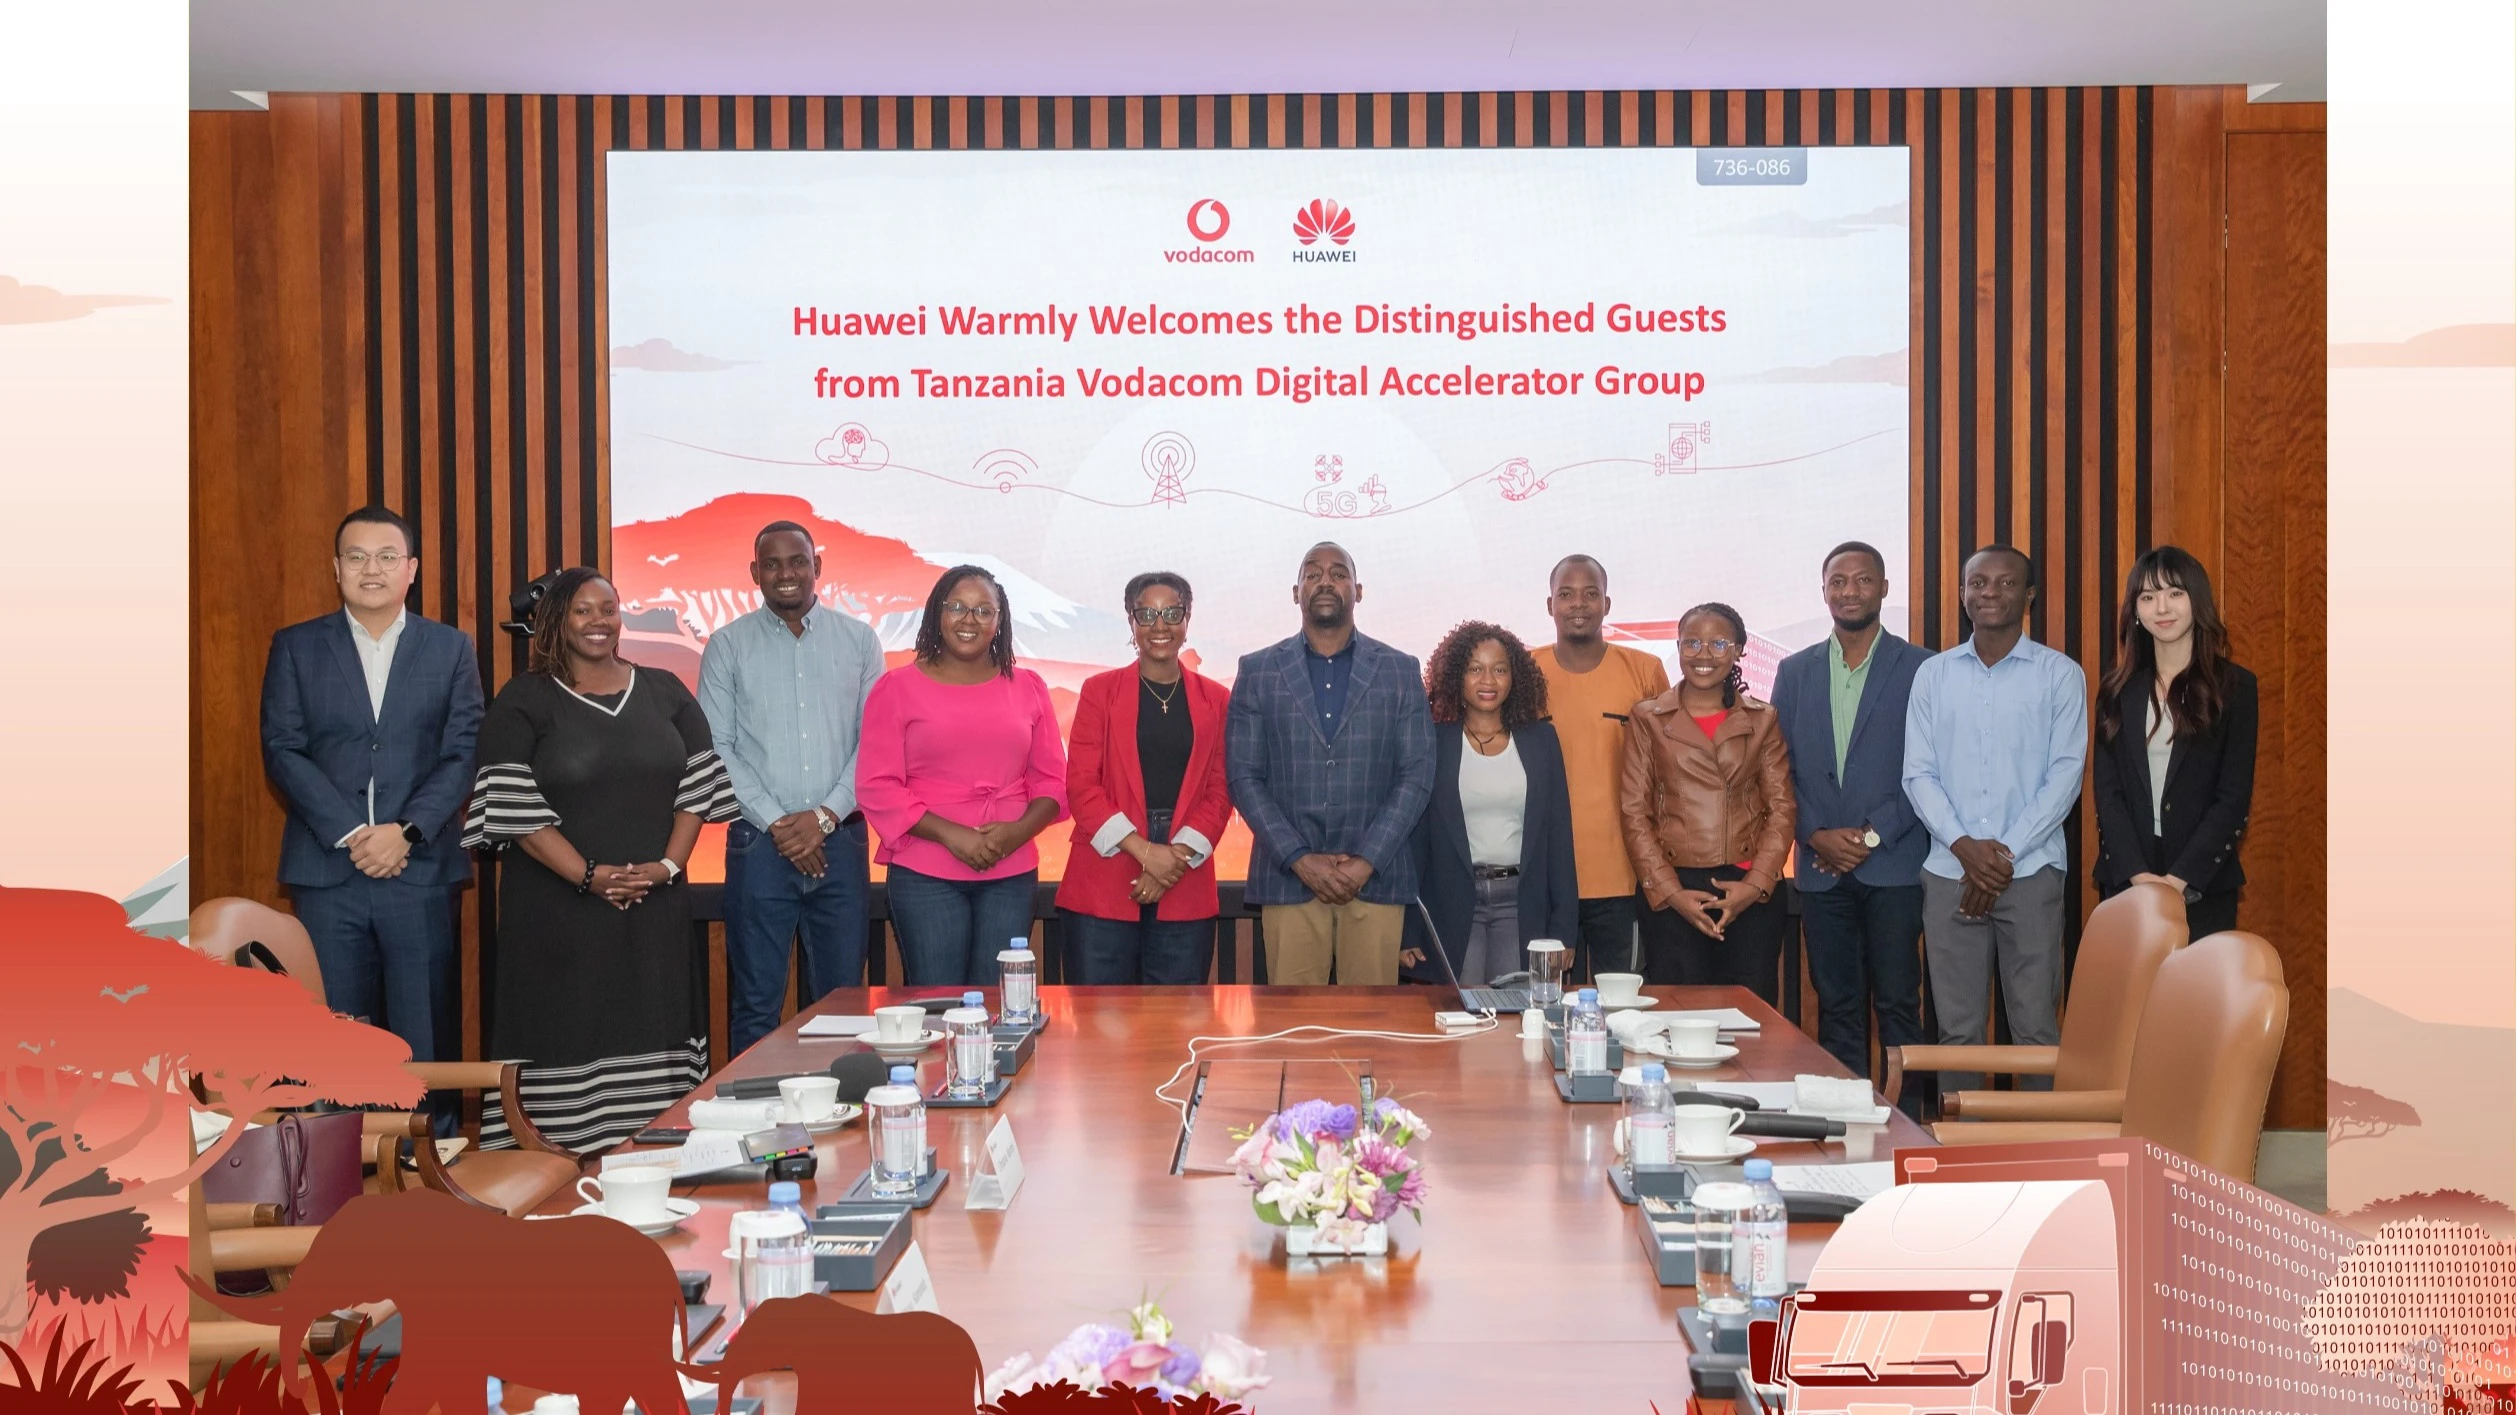 Huawei and Vodacom staff pose for a group photo with Tanzania startup founders at the Huawei Office in Shenzhen, during their recent study visit to China.